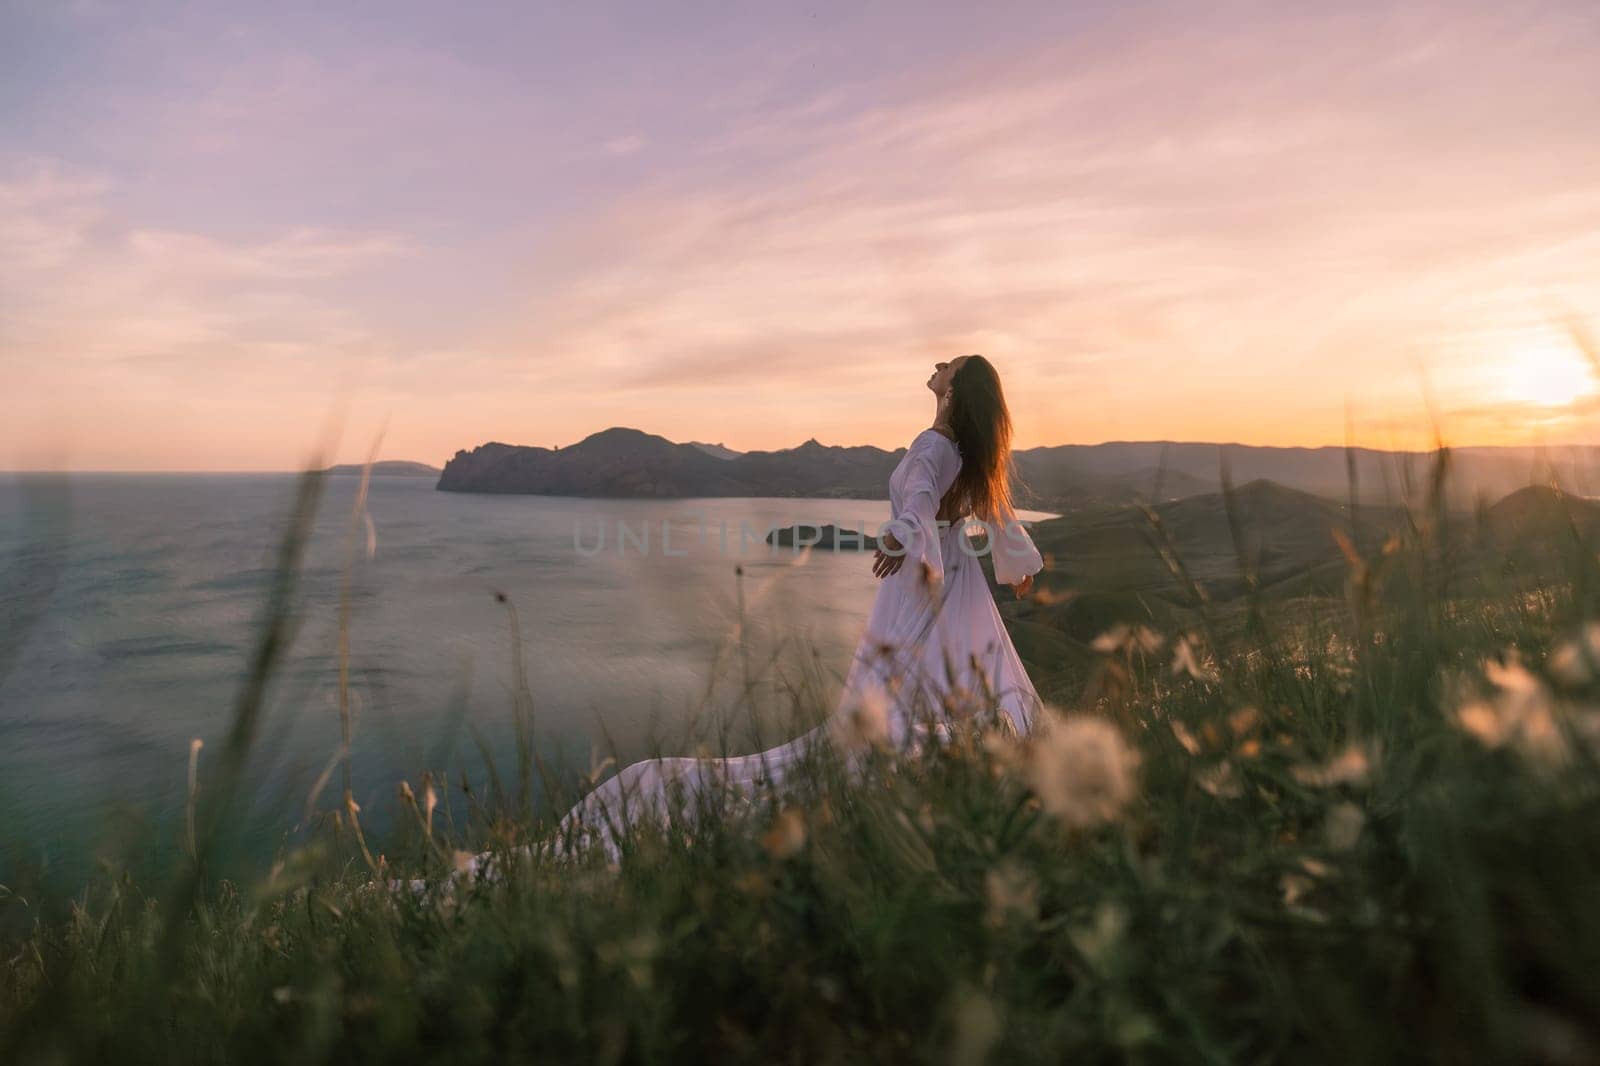 A woman in a white dress stands on a grassy hill overlooking the ocean. The sky is a mix of orange and purple hues, creating a serene and peaceful atmosphere. The woman is enjoying the view